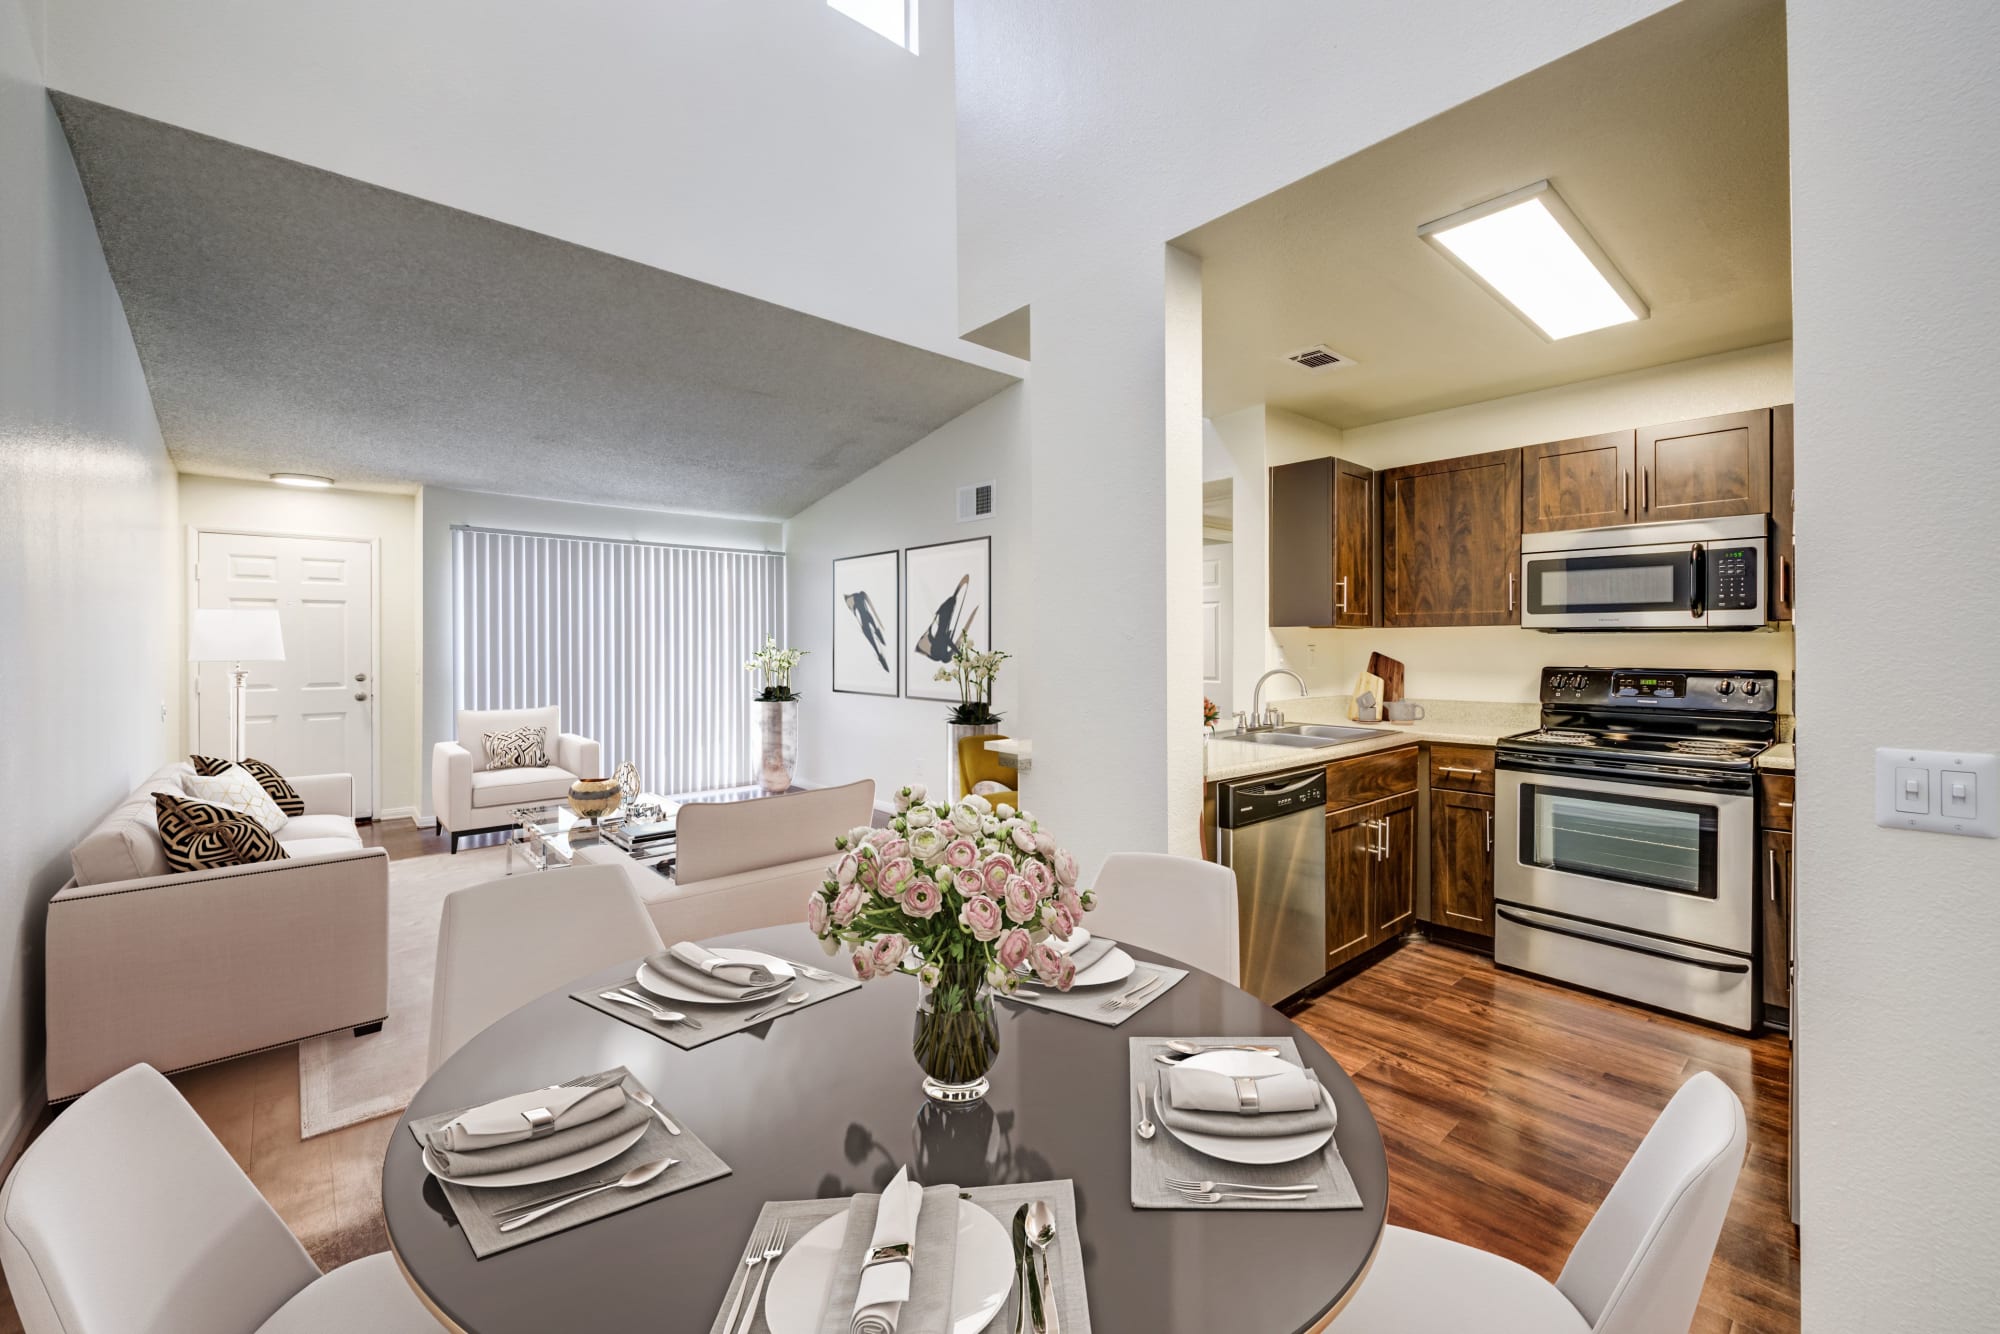 Dining room looking into the kitchen at Tuscany Village Apartments in Ontario, California